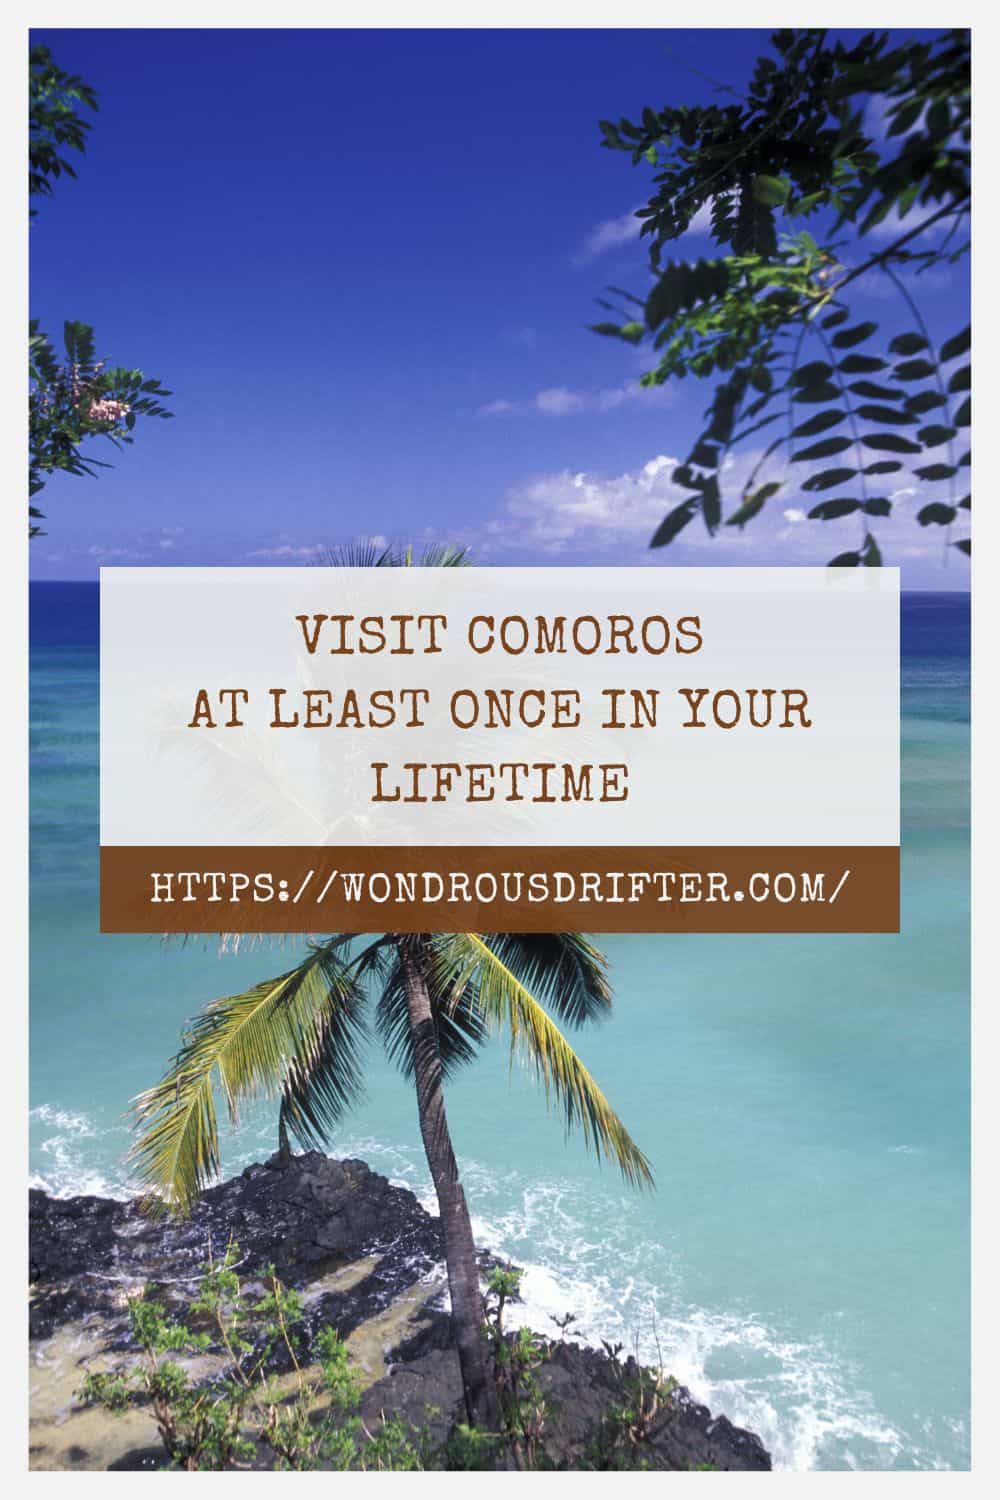 Visit Comoros at least once in your lifetime